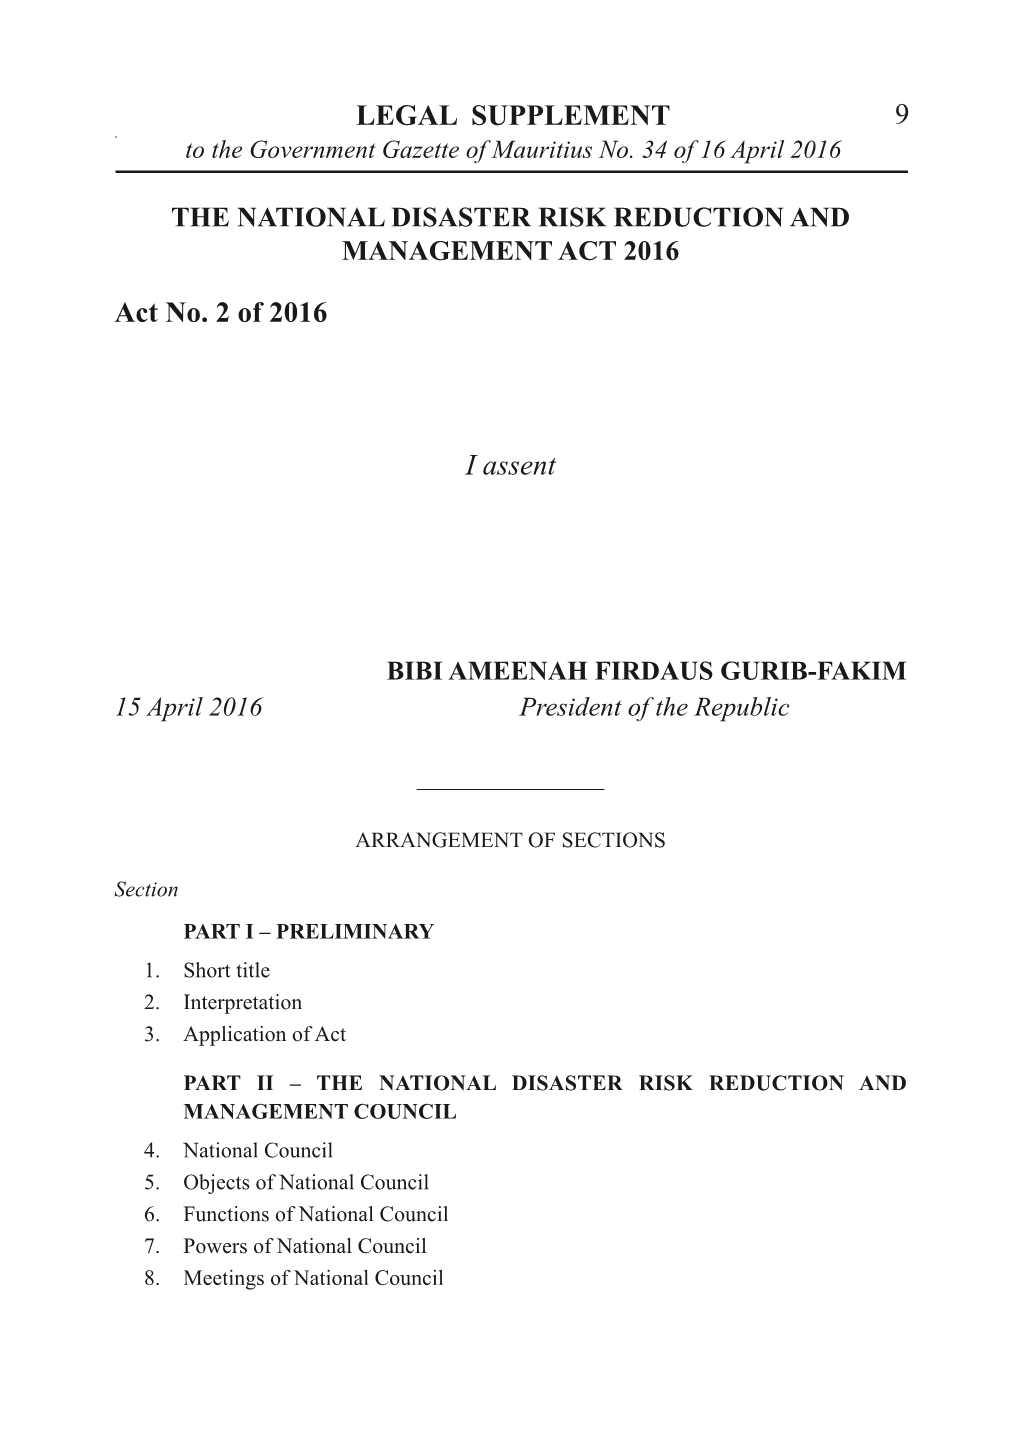 The National Disaster Risk Reduction and Management Act 2016